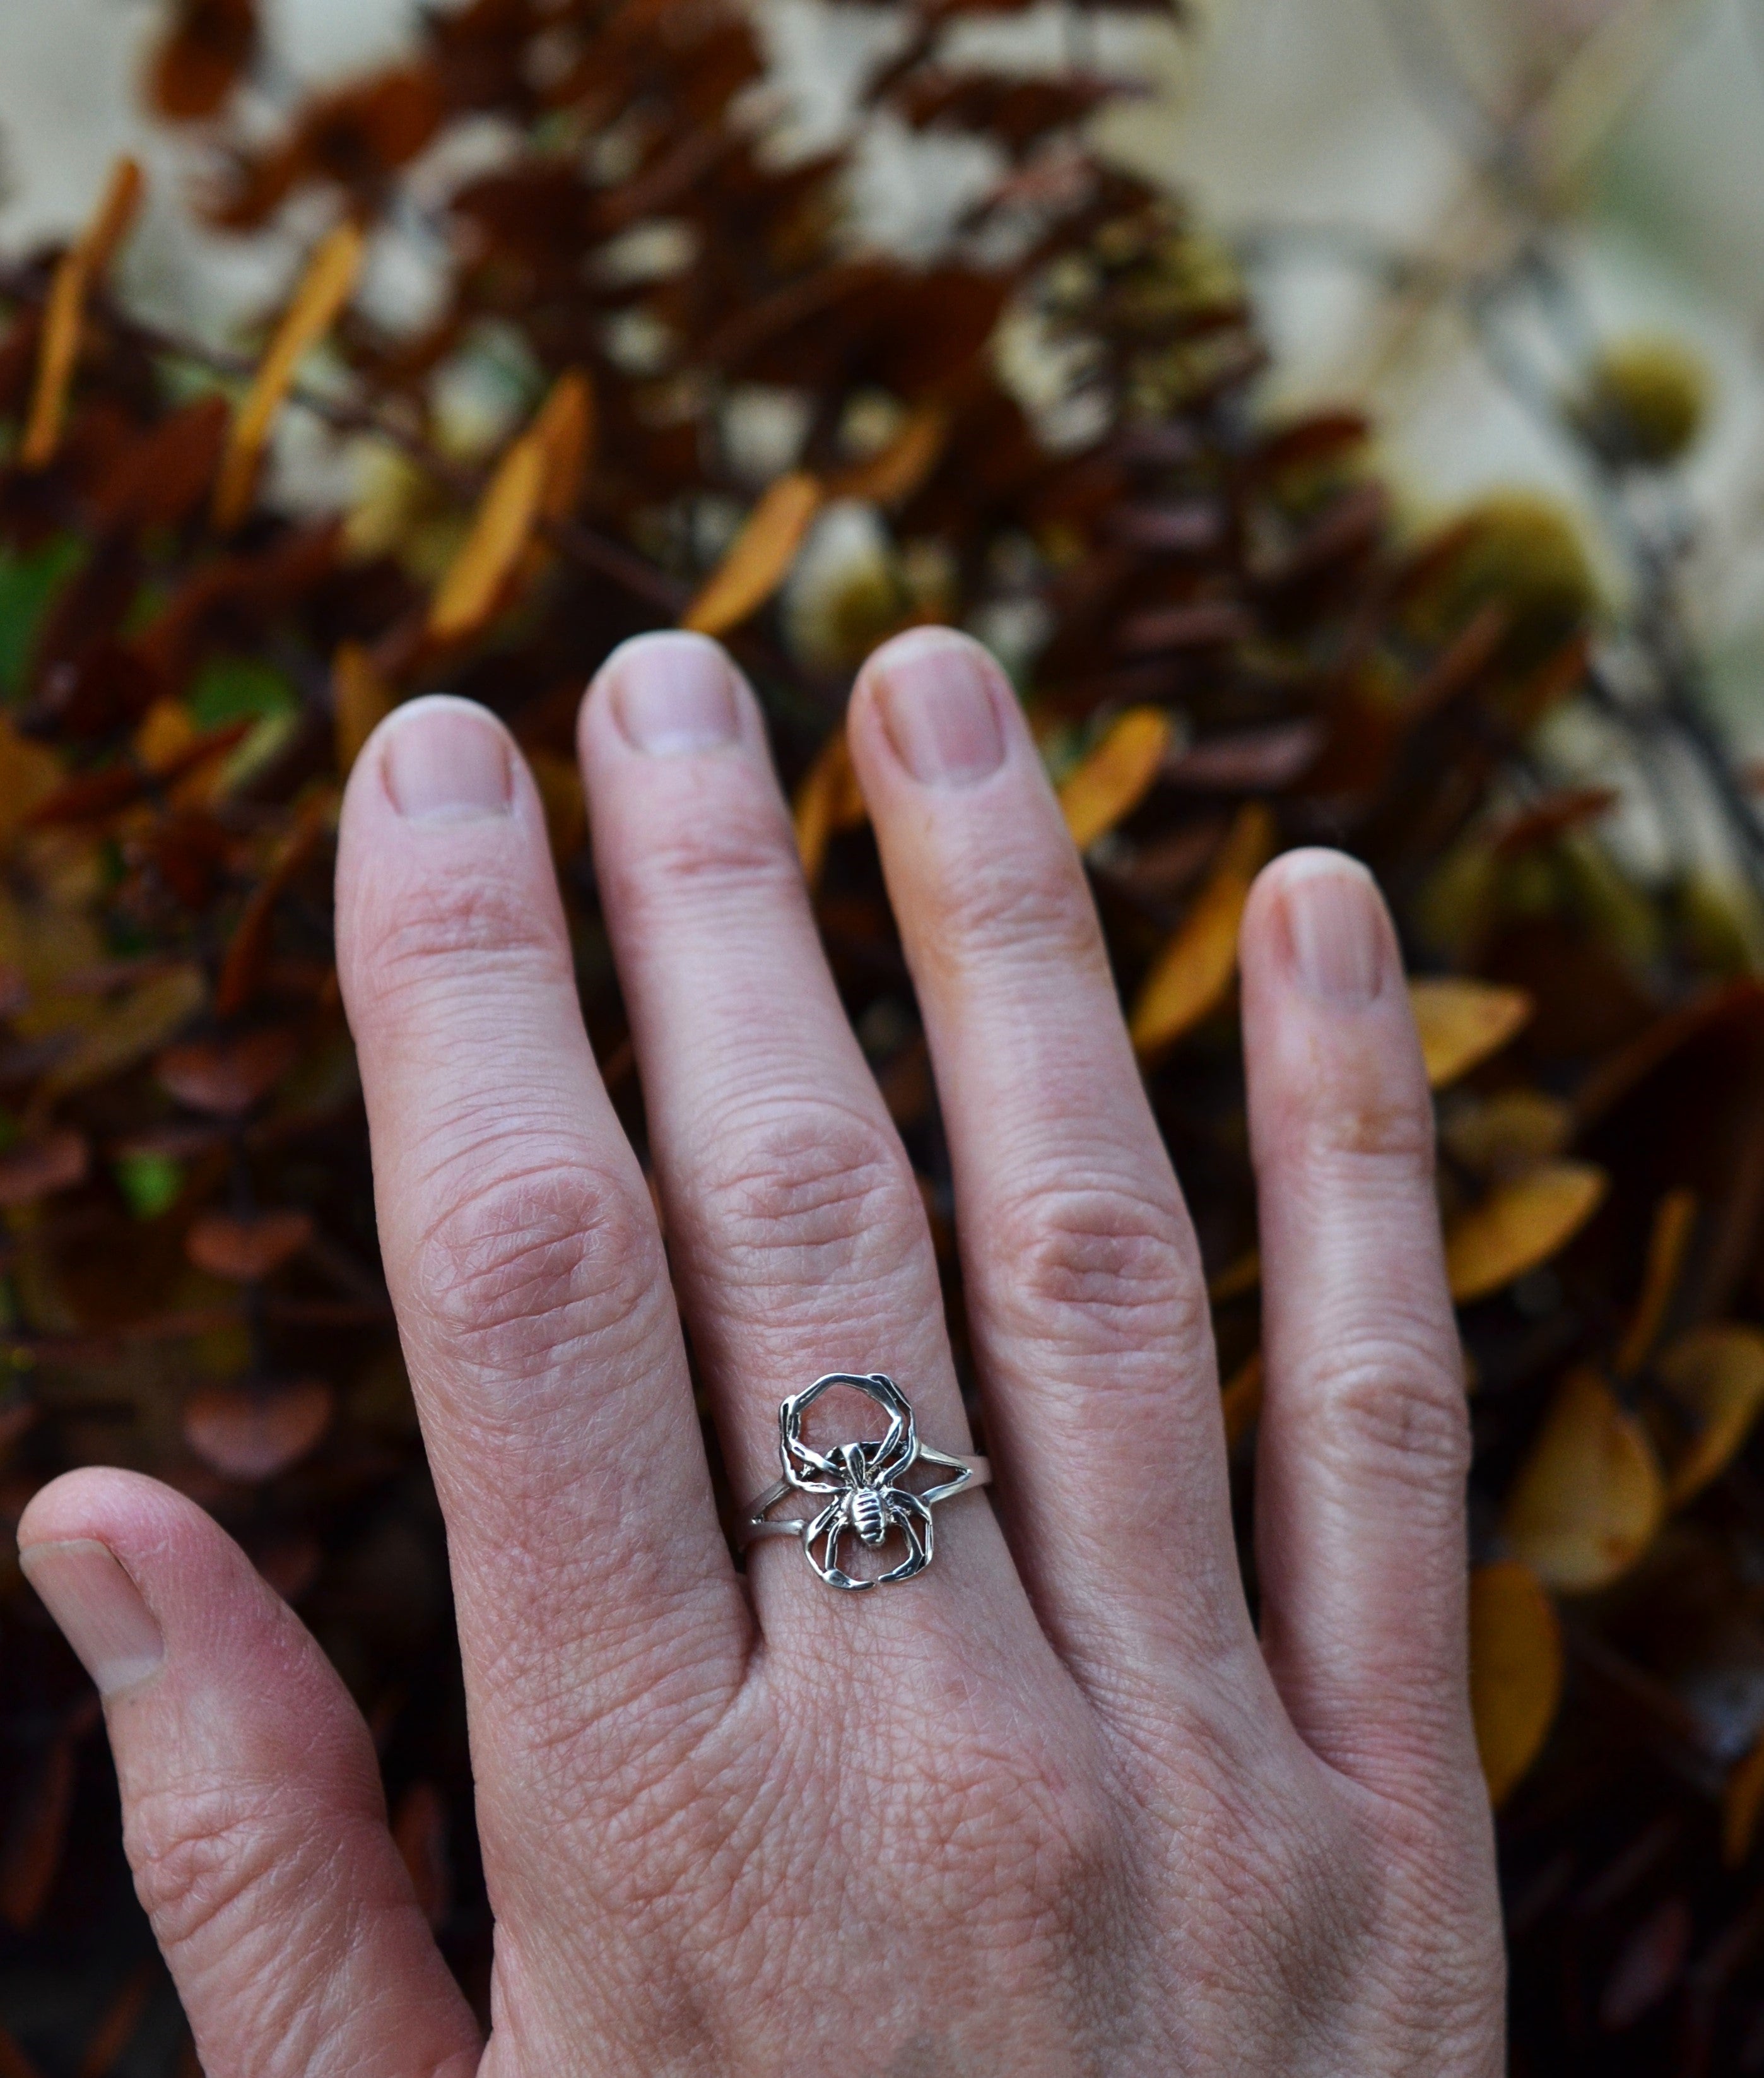 Low Stock! Spider Ring - Slightly Adjustable from 6-10 - Sterling Silver